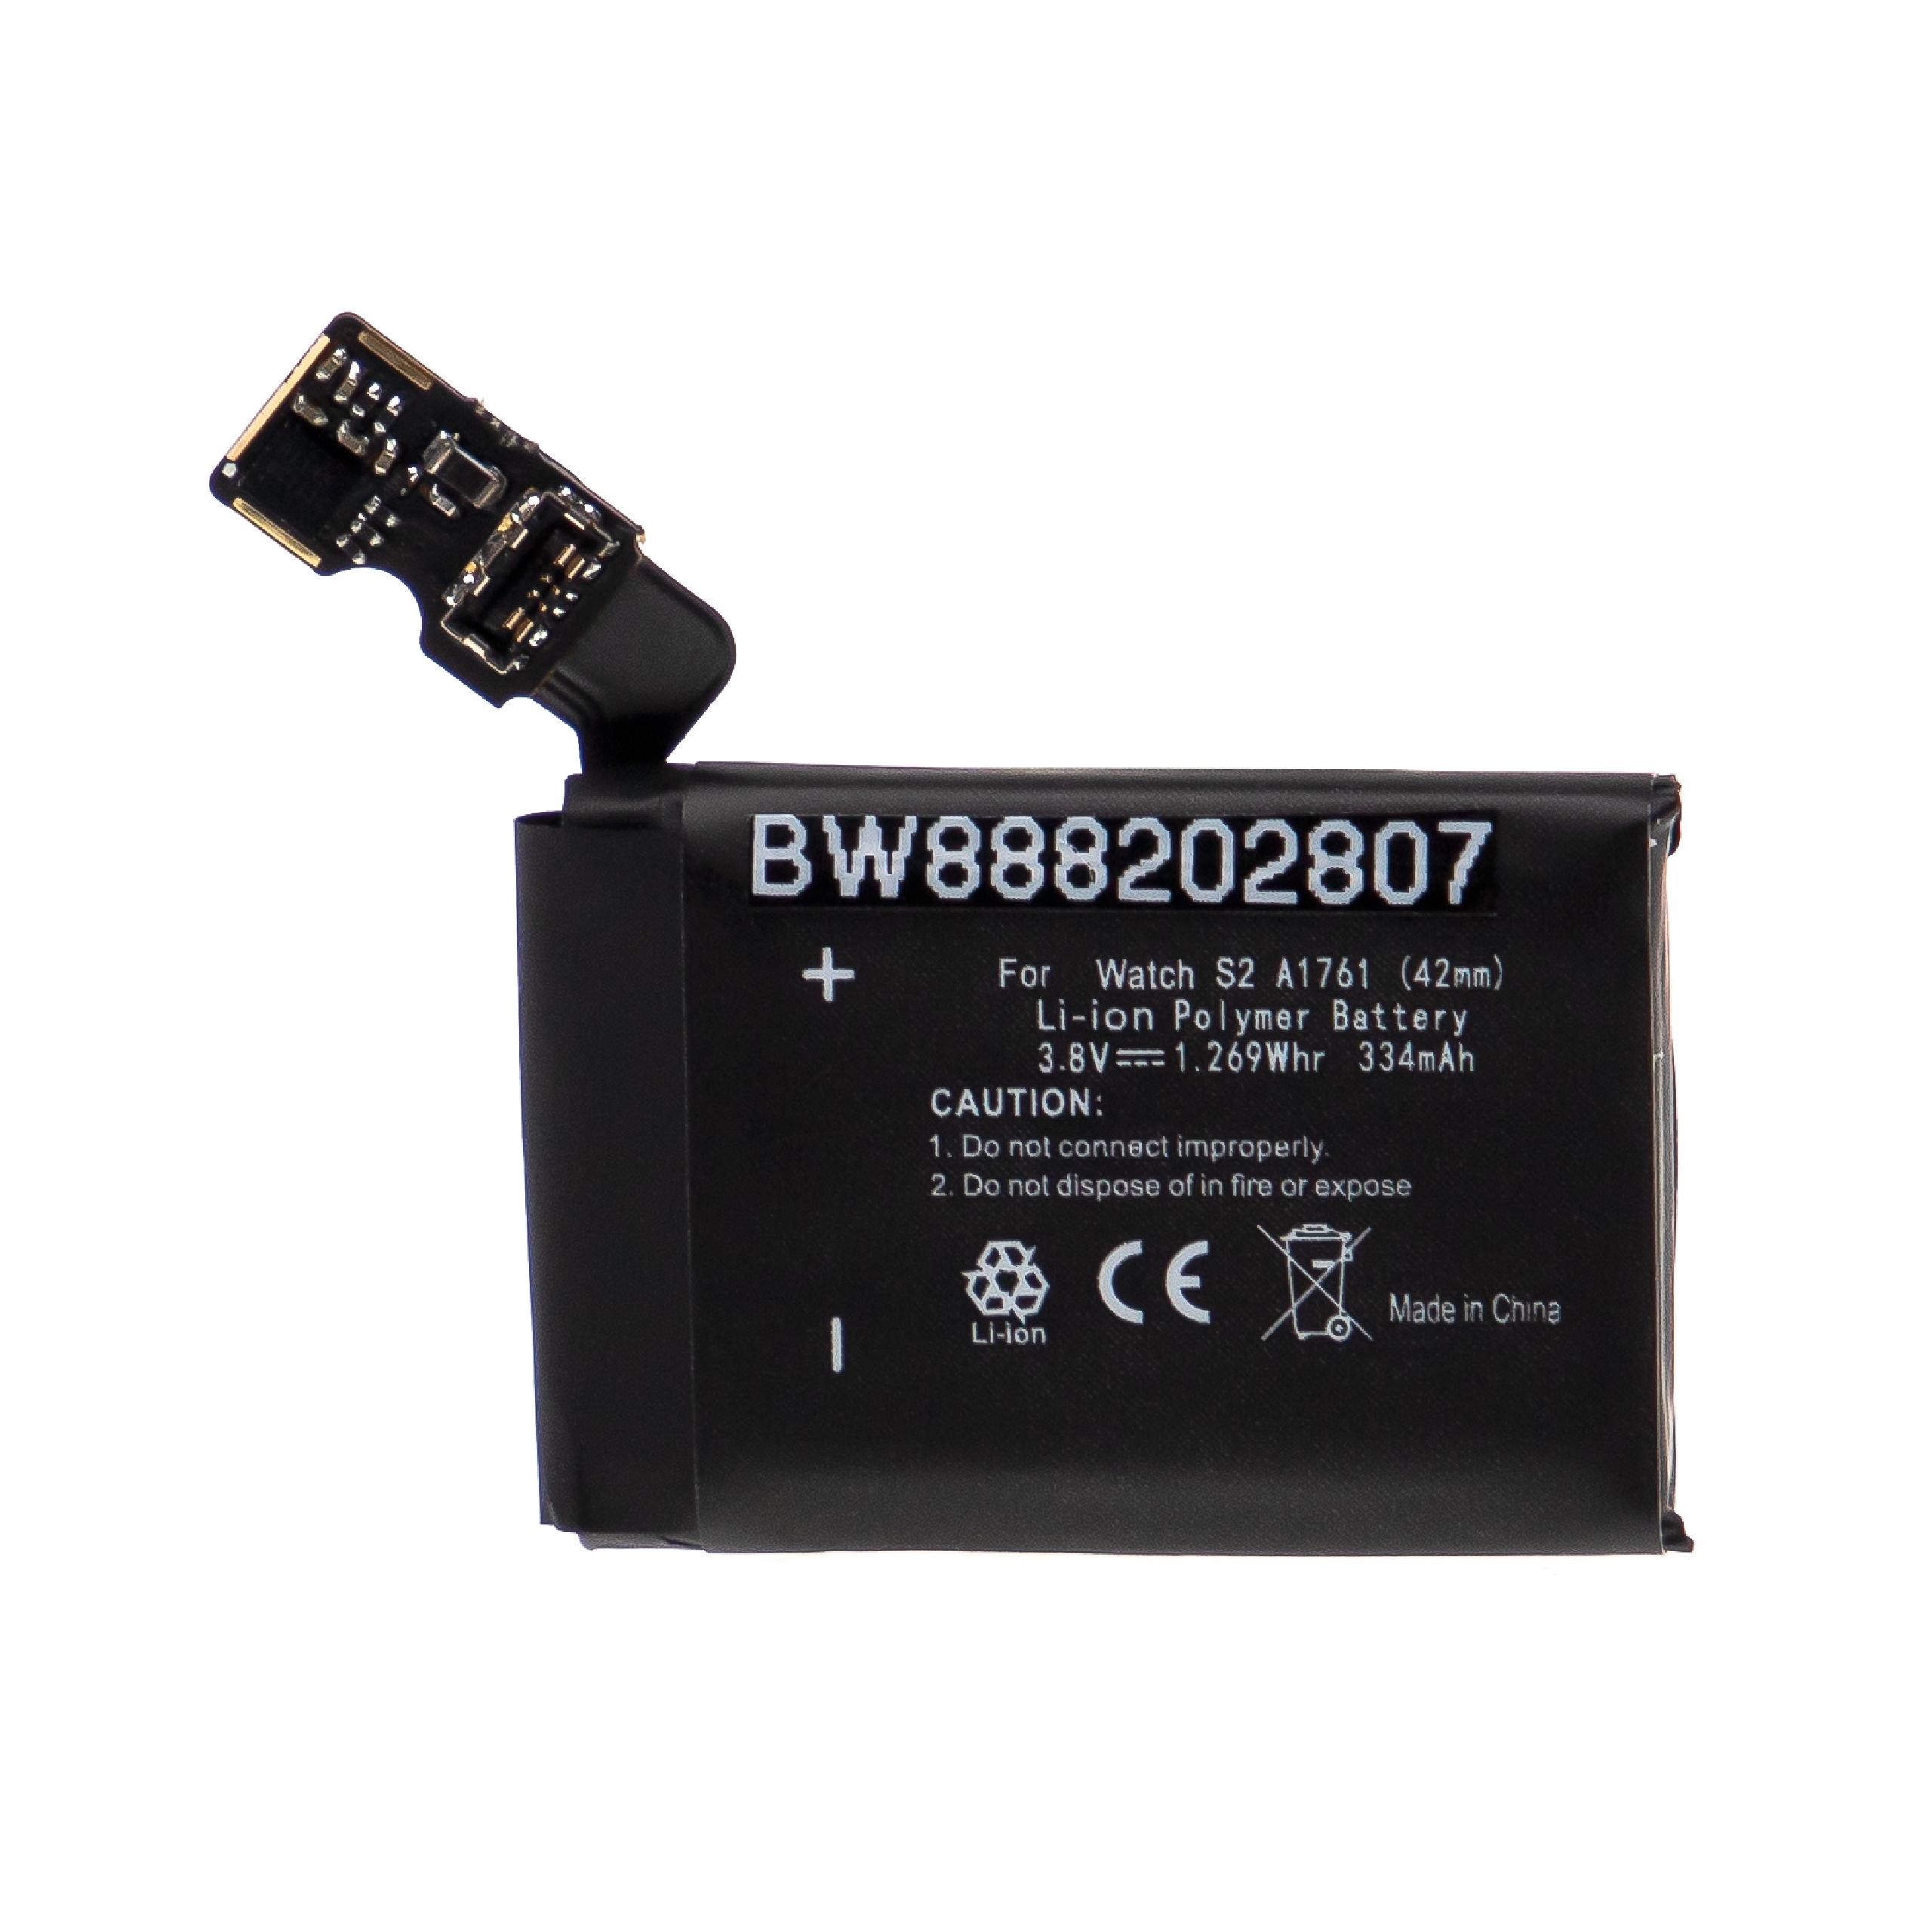 Smartwatch Battery Replacement for Apple A1761 - 334mAh 3.8V Li-polymer